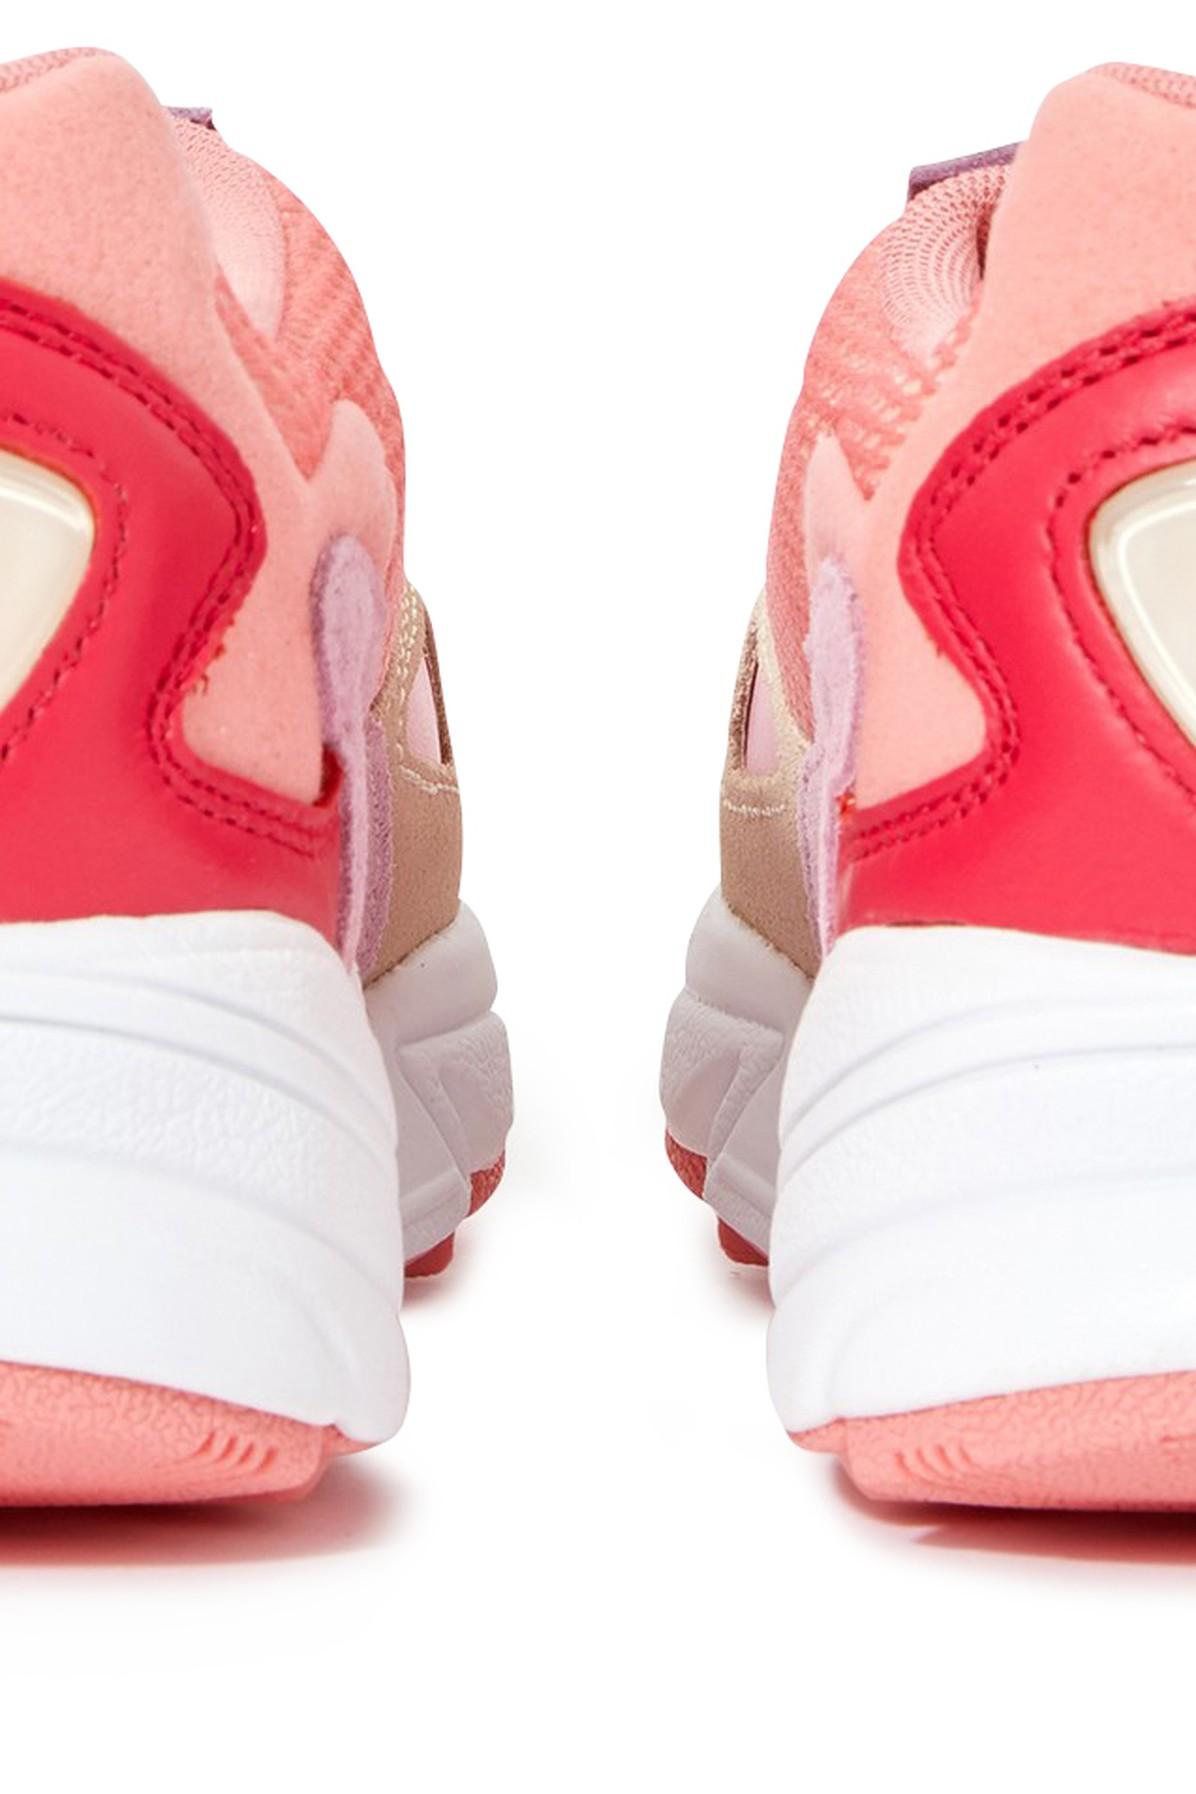 adidas Originals Leather Falcon in Pink - Save 55% | Lyst